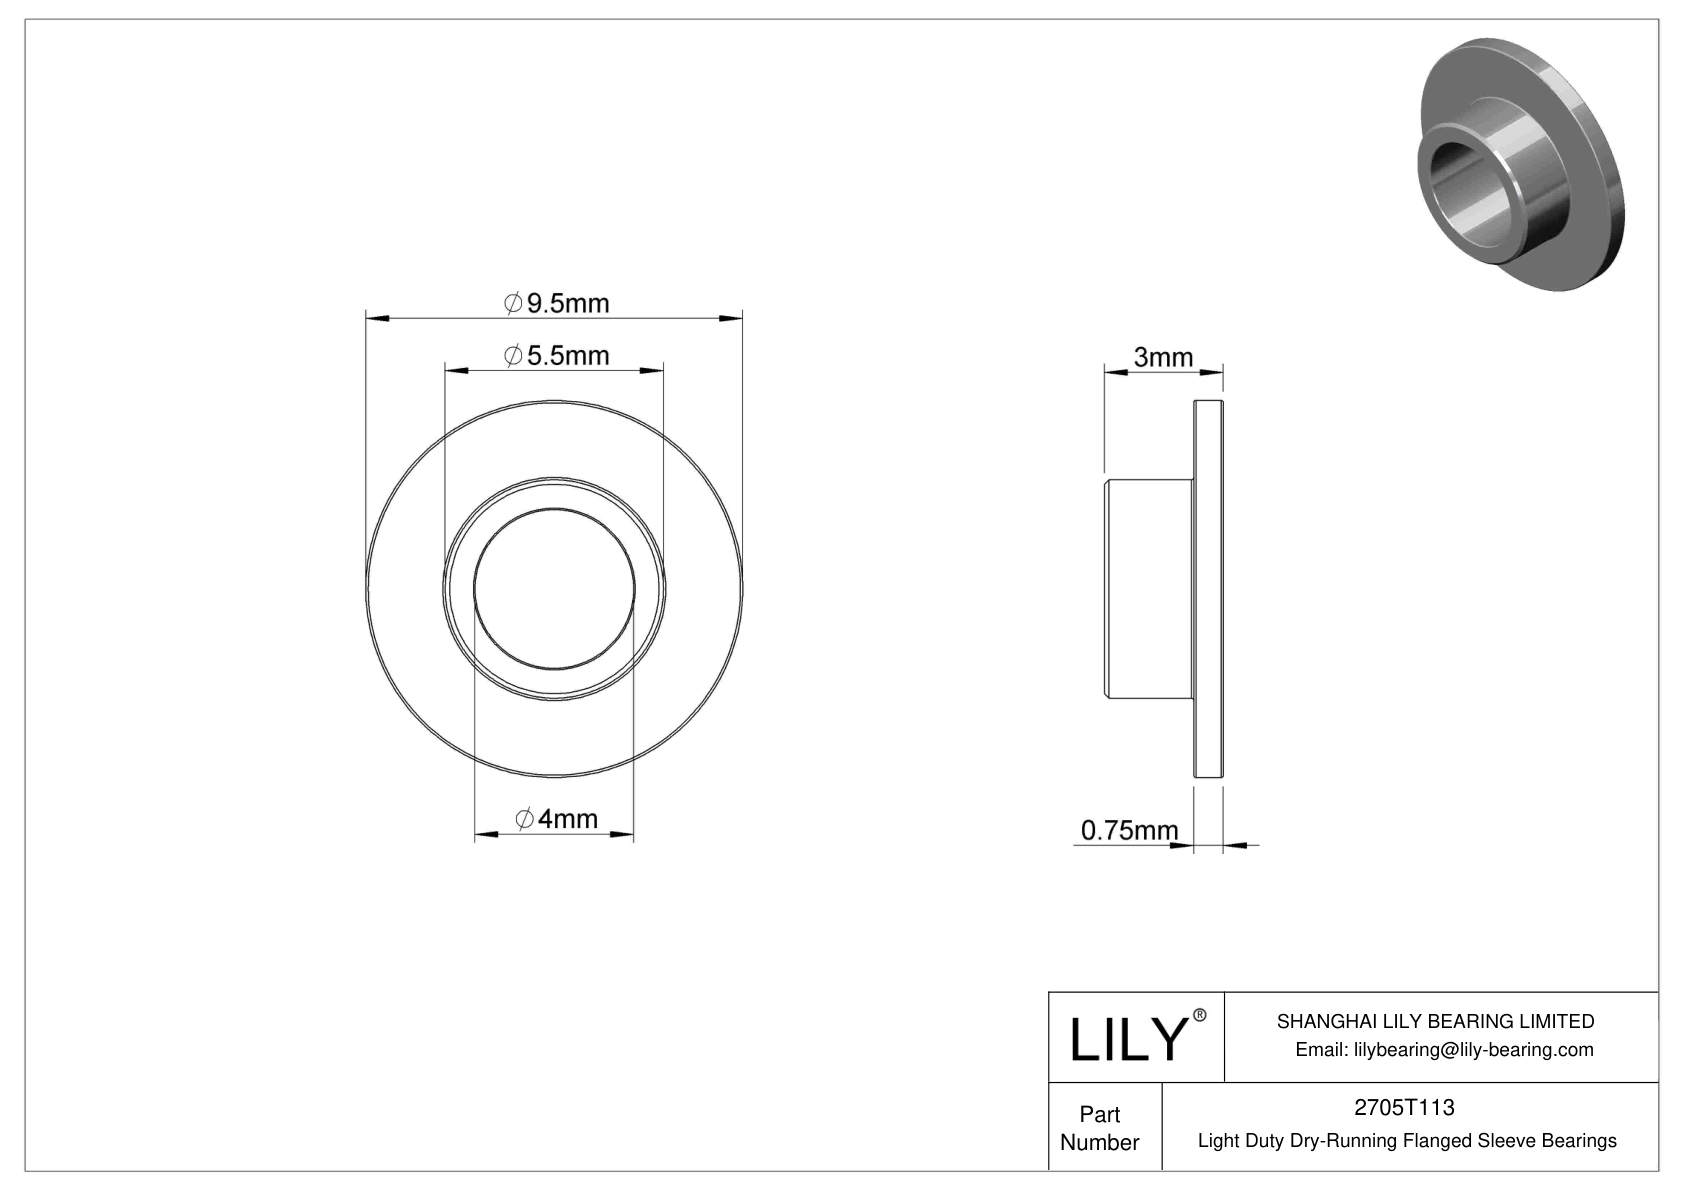 CHAFTBBD Light Duty Dry-Running Flanged Sleeve Bearings cad drawing